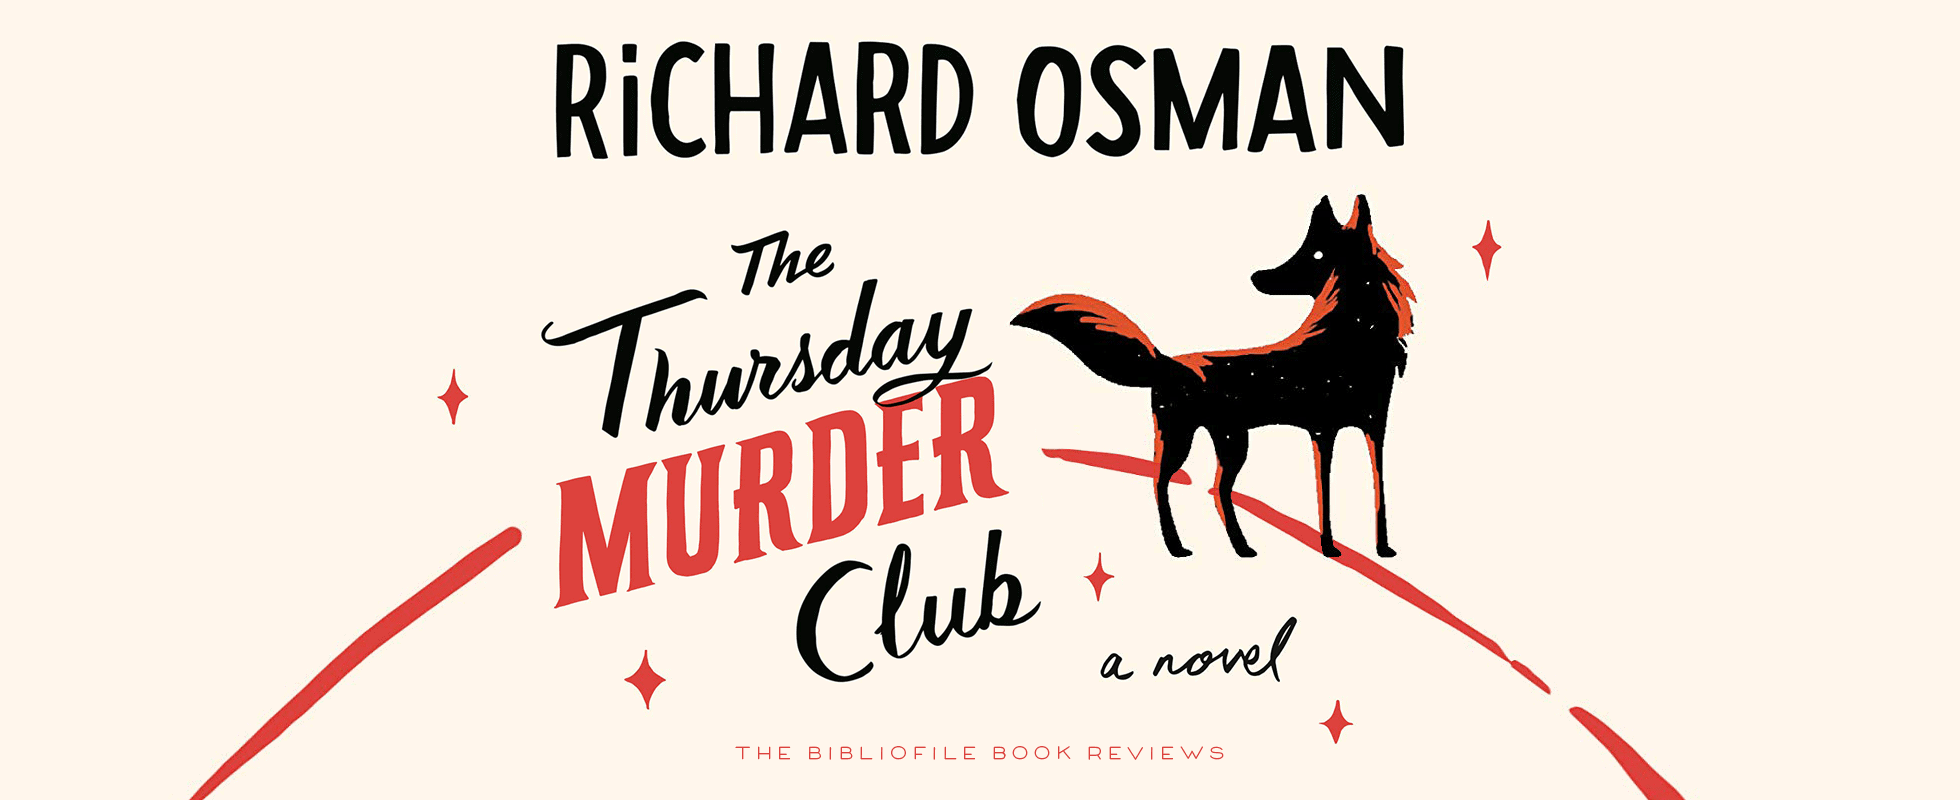 the thursday murder club by richard osman book review synopsis summary review plot spoilers